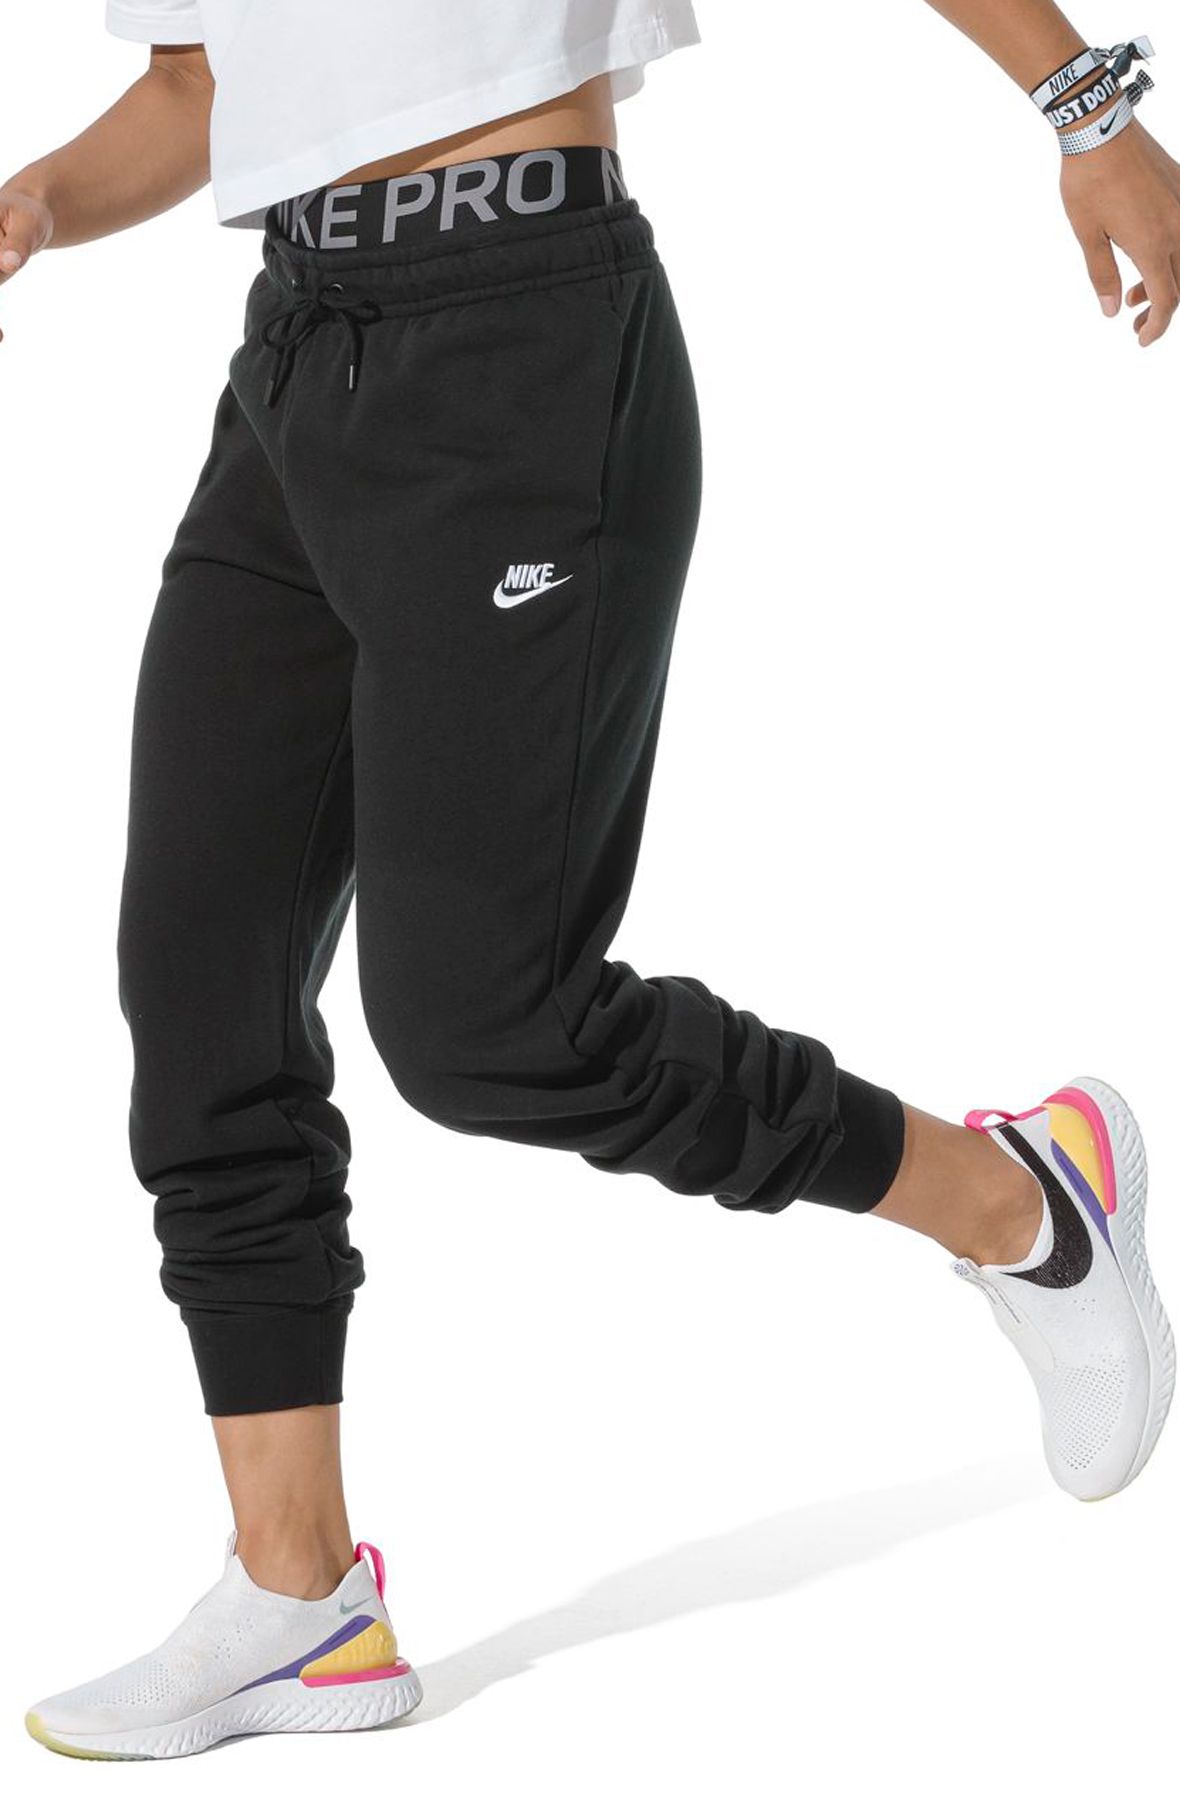 Nike Women's Essential Fleece Pants BV4095-815 Peach Size S-XL New With Tags